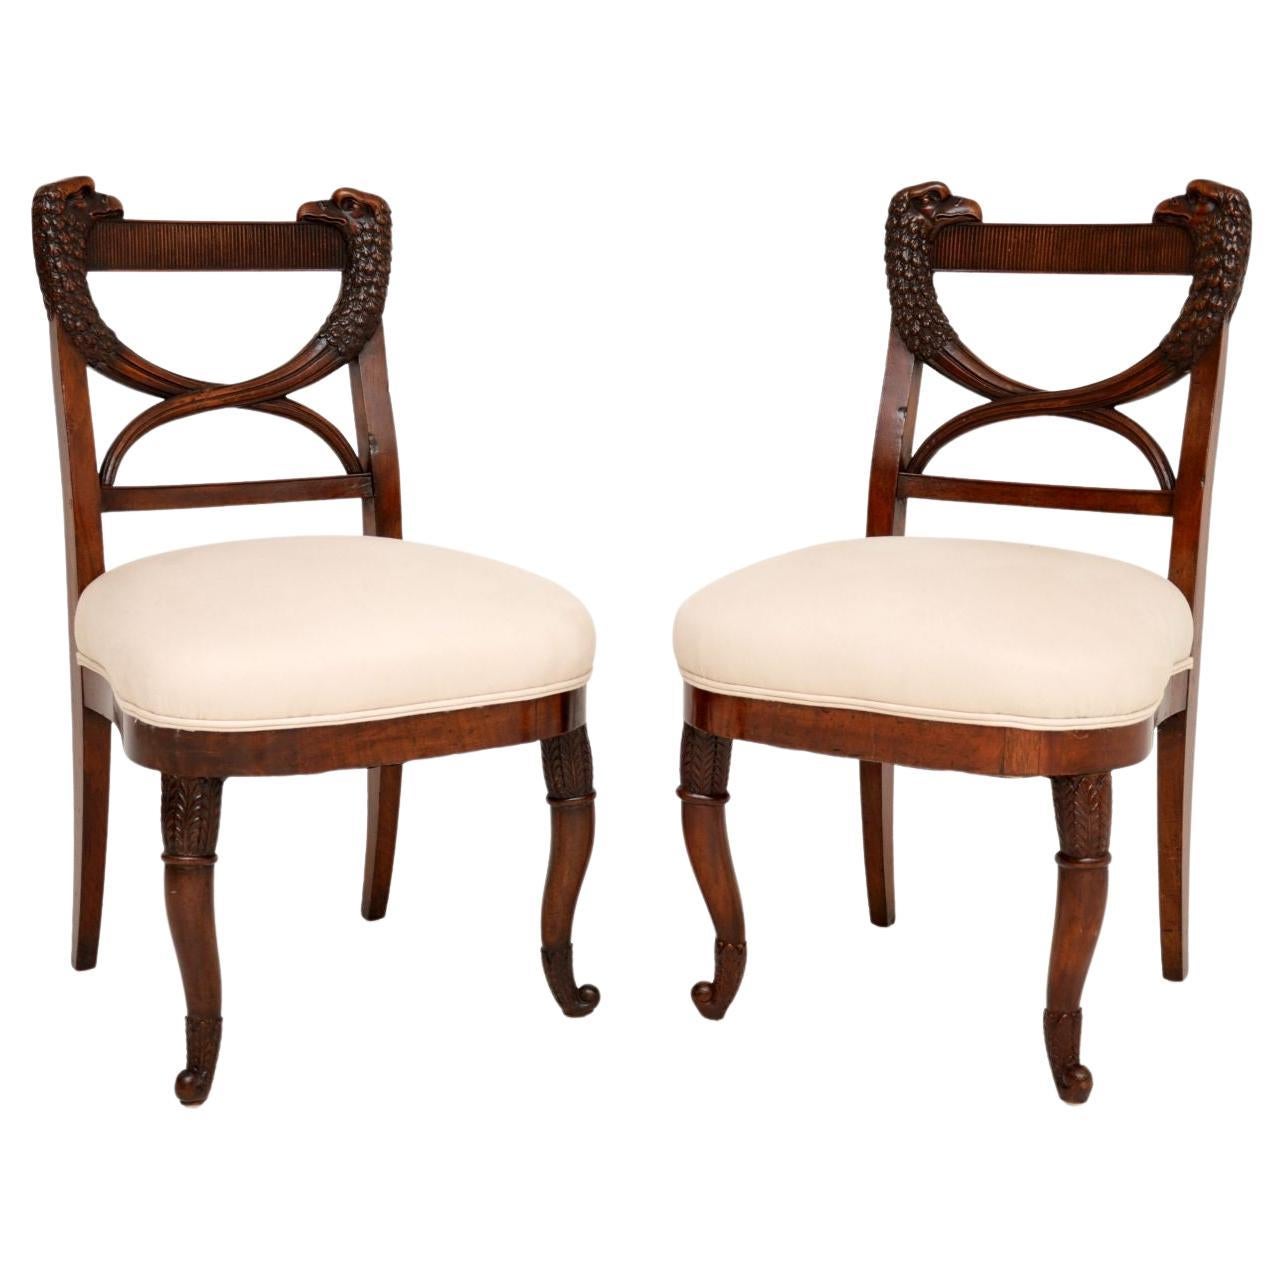 Pair of Antique Regency Carved Side Chairs